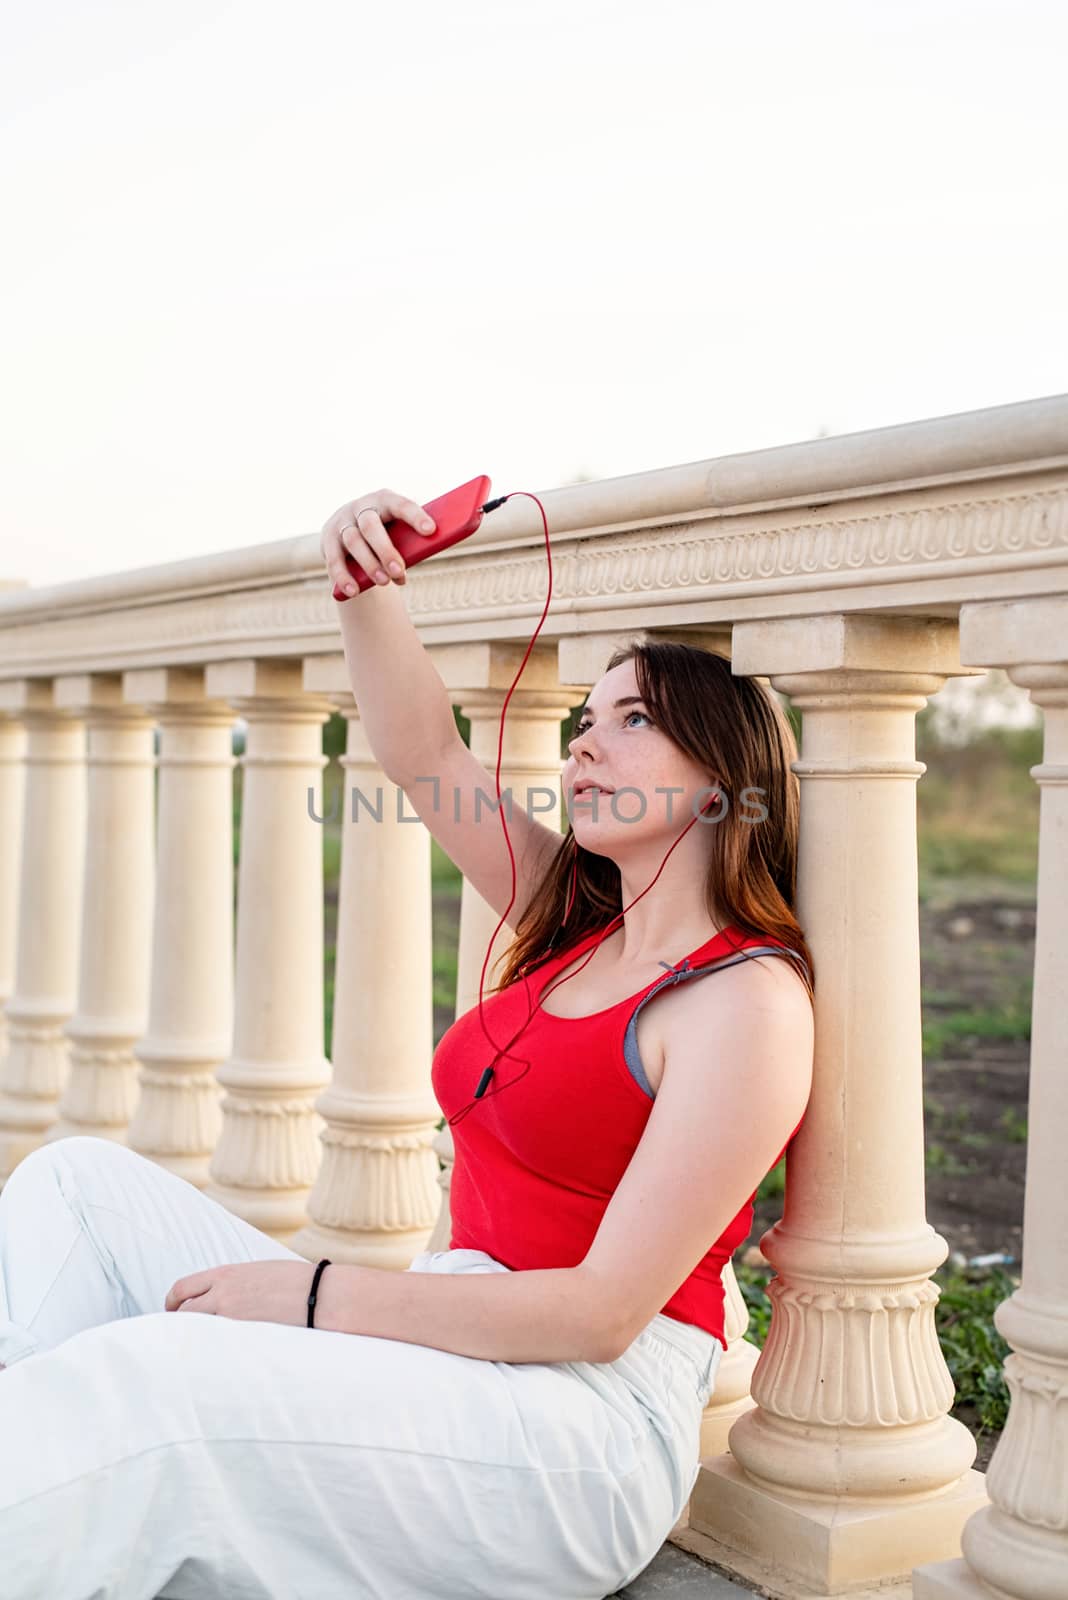 Technology, music and happiness concept. Young woman or student girl with headphones listening to music relaxing and taking selfie outdoors in autumn park